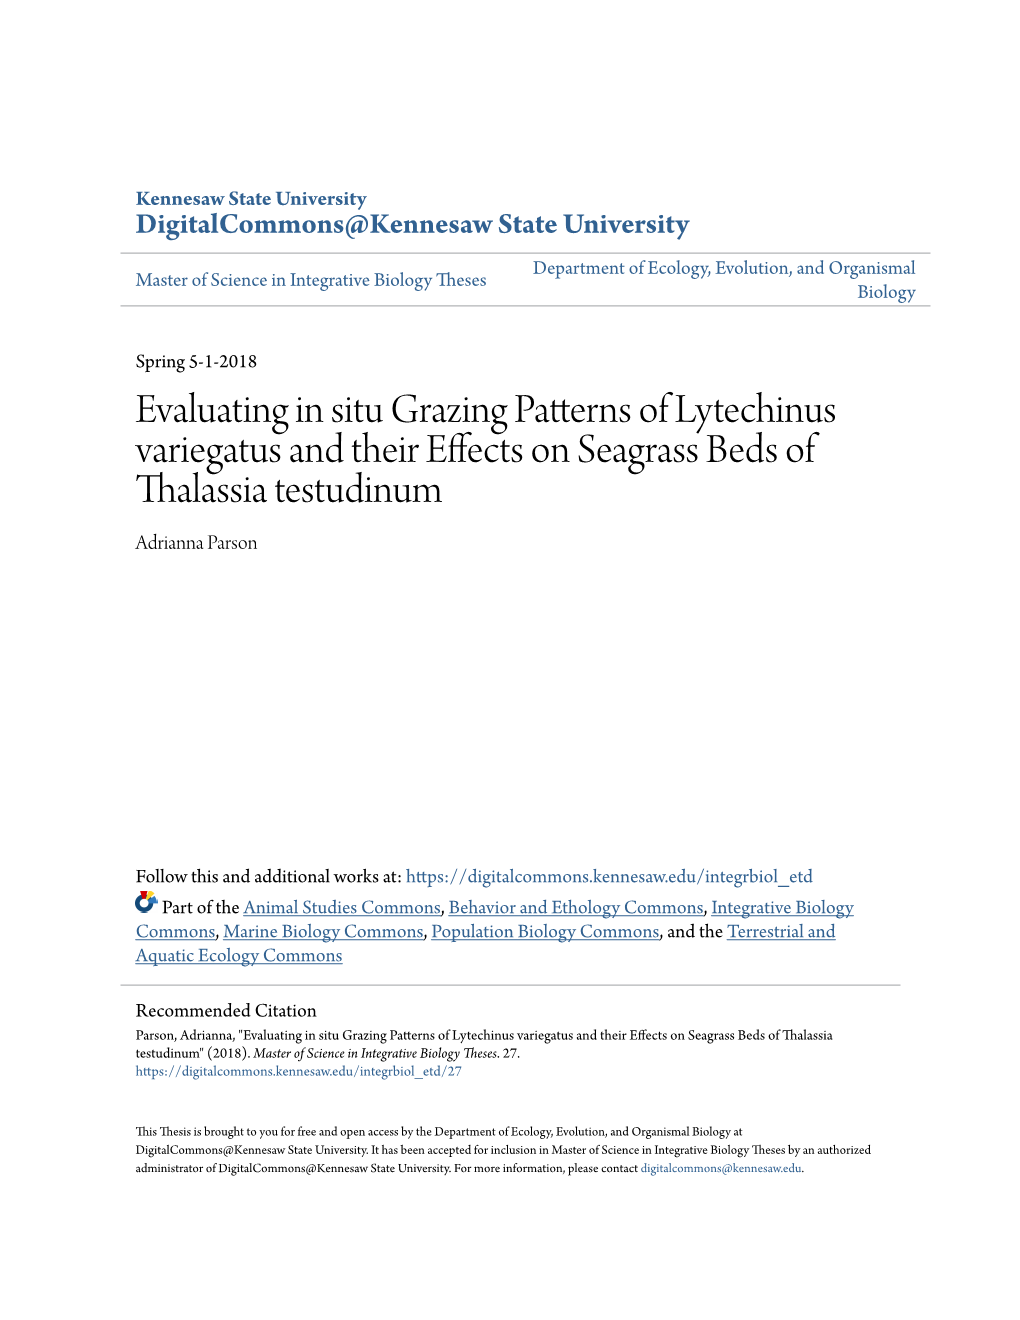 Evaluating in Situ Grazing Patterns of Lytechinus Variegatus and Their Effects on Seagrass Beds of Thalassia Testudinum Adrianna Parson